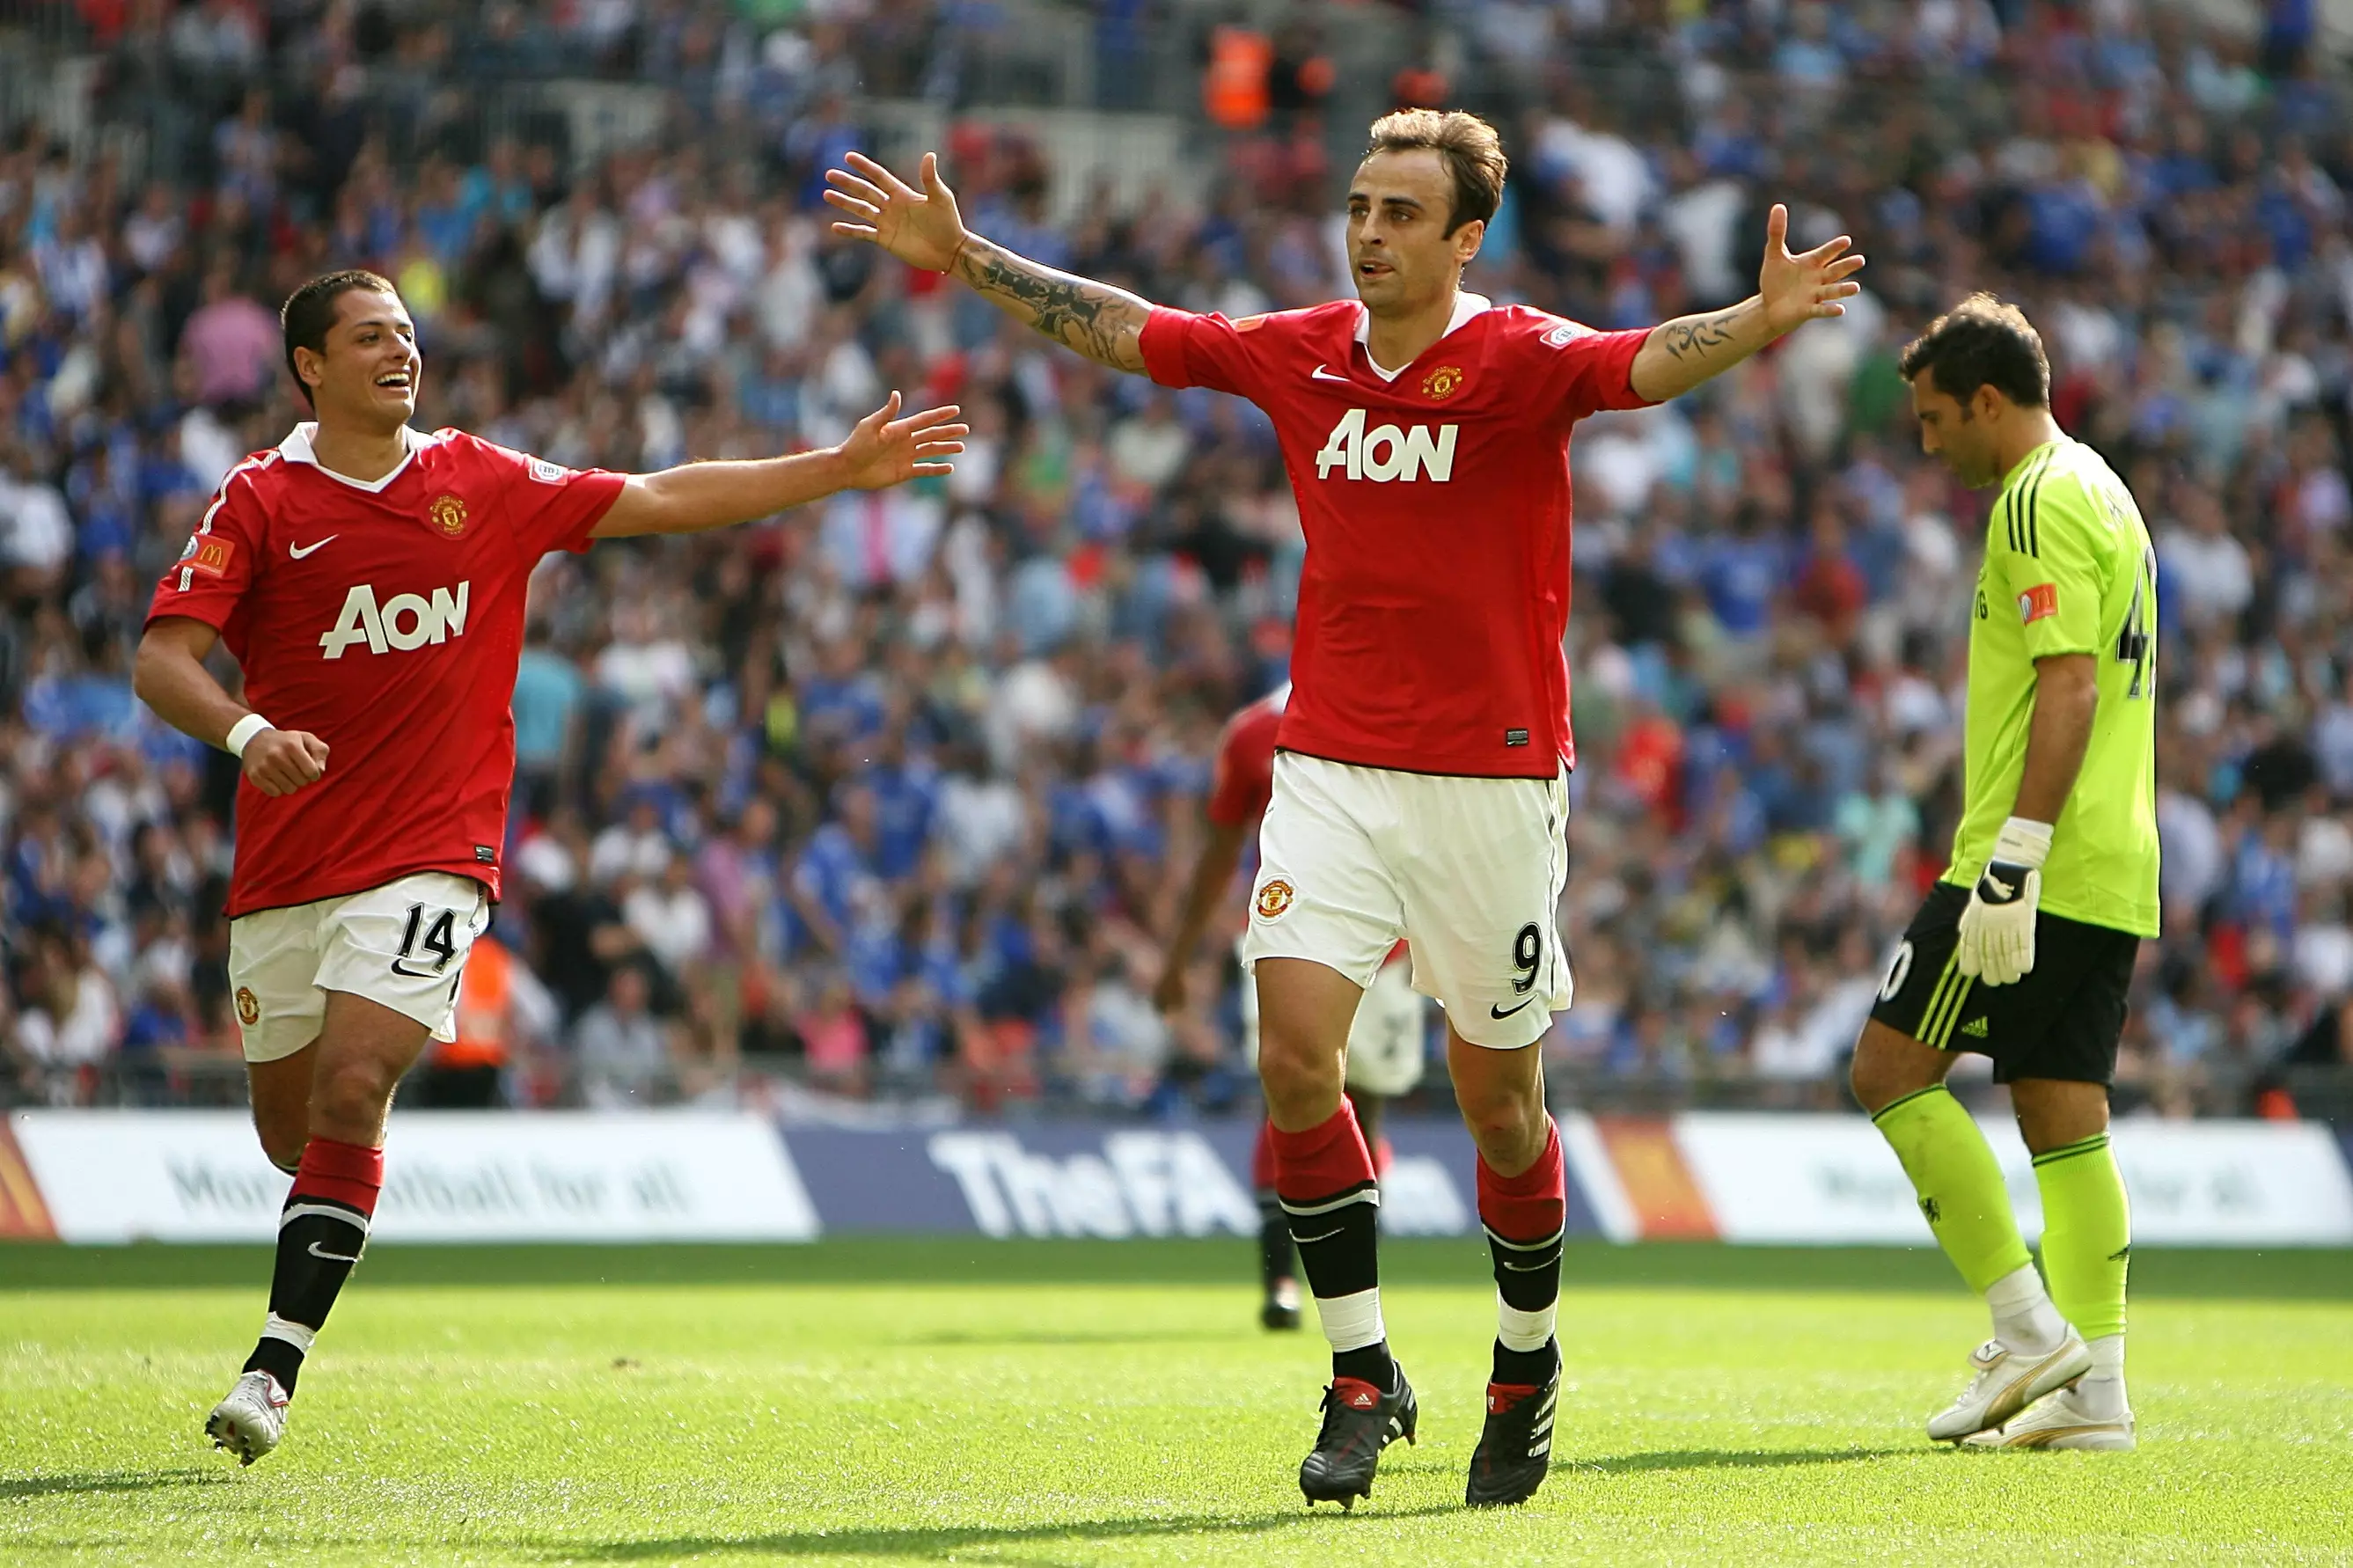 Berbatov became a fan favourite at Old Trafford. Image: PA Images